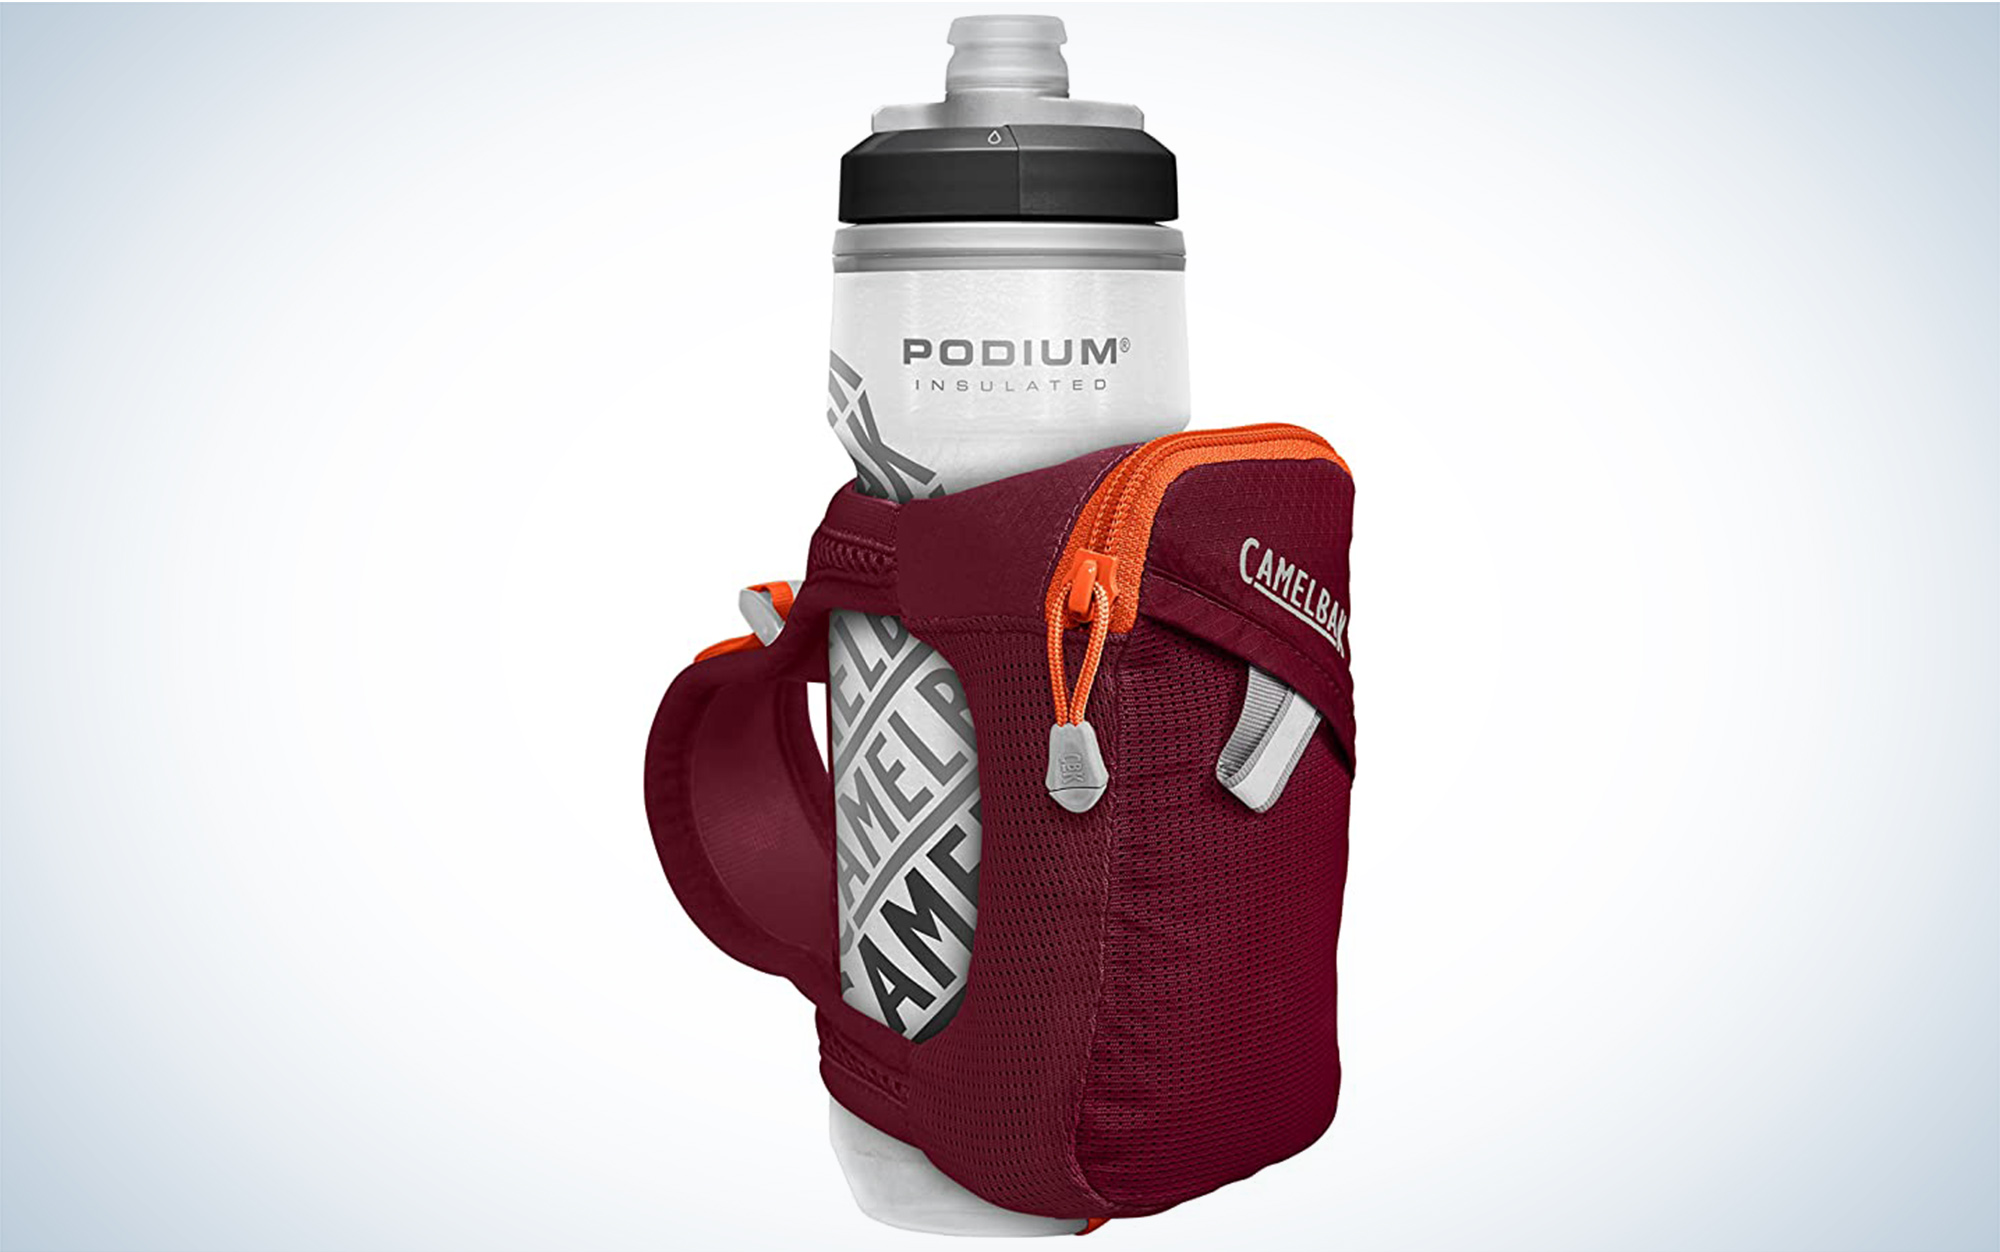 The Quick Grip is a handheld pack for your water bottle.